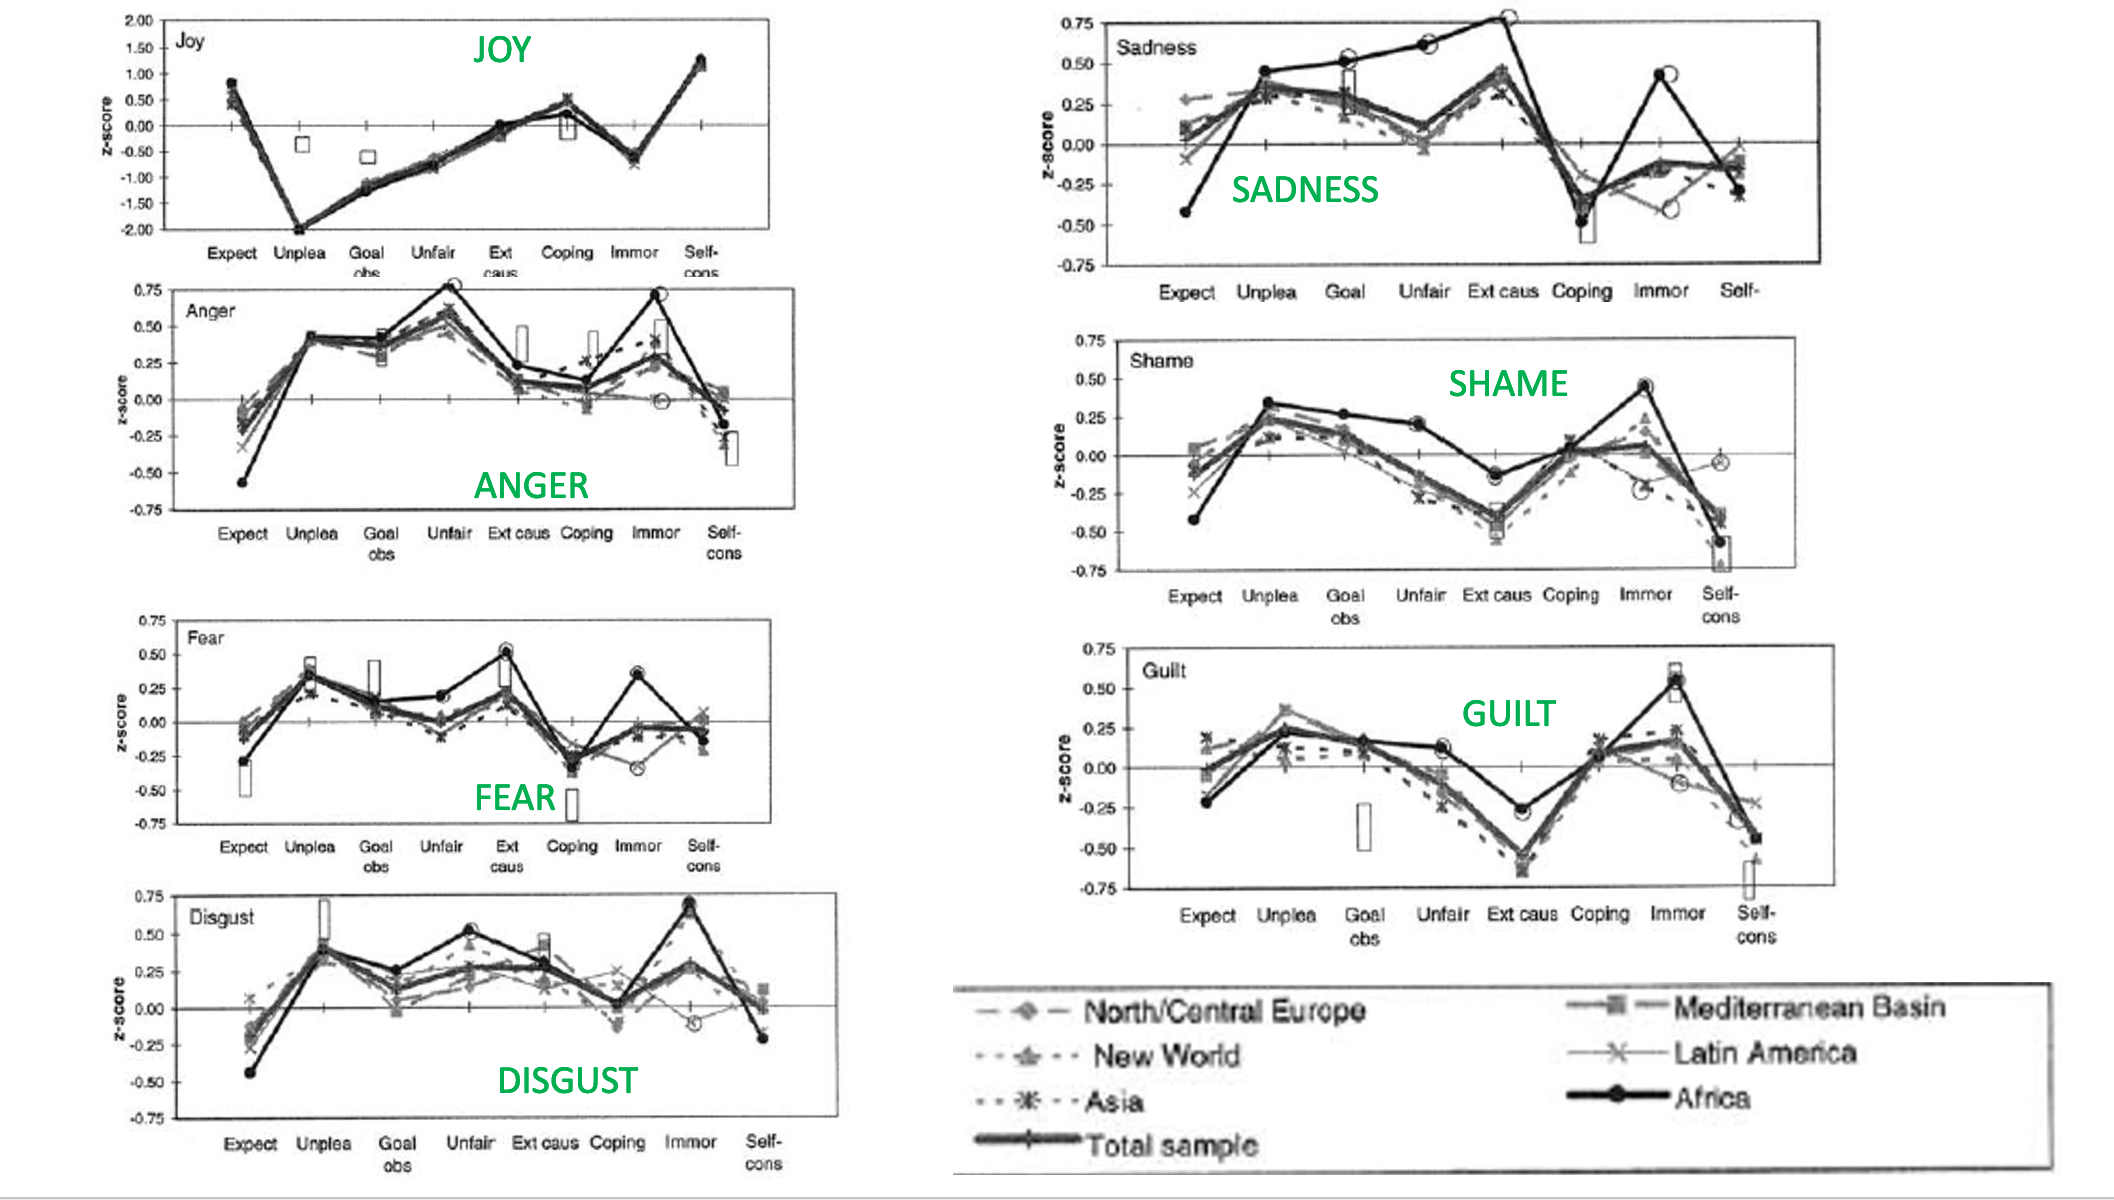 Changes in patterns of cognitive appraisals are displayed for 7 emotions: joy, sadness, anger, shame, fear, guilt, and disgust. Participants came from six world regions: Northern and Central Europe, Asia, the Mediterranean Basin, Latin American, and the New World. The appraisals tracked were: novelty, unpleasantness, goal obstruction, unfairness, external causation, coping ability, immorality, and self-consistency.